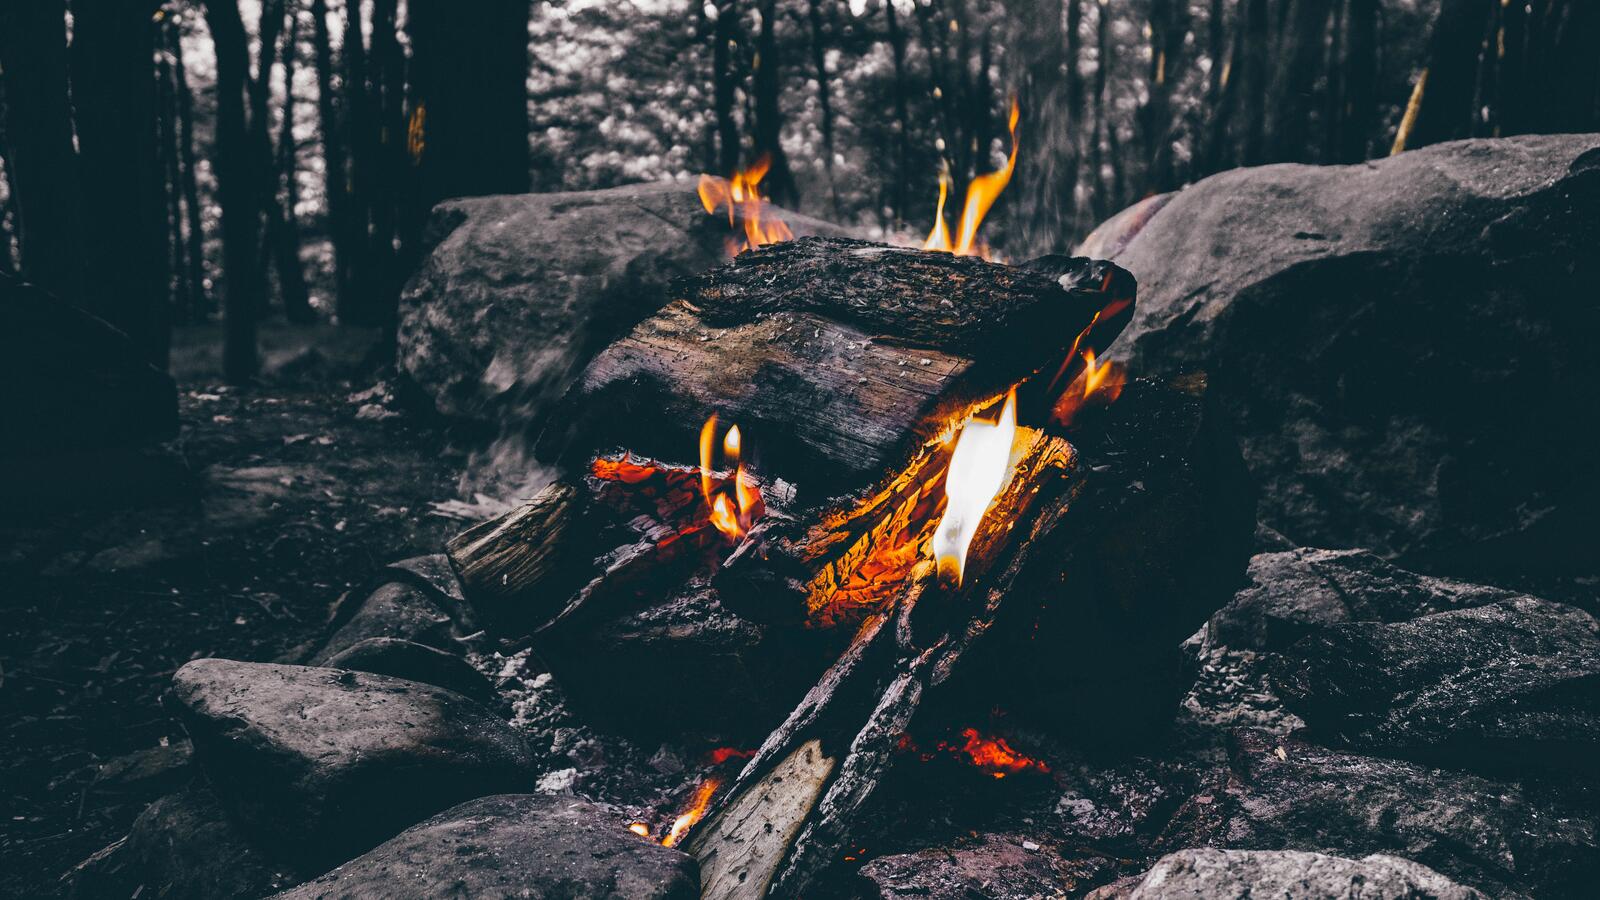 Wallpapers flames fire campfire on the desktop